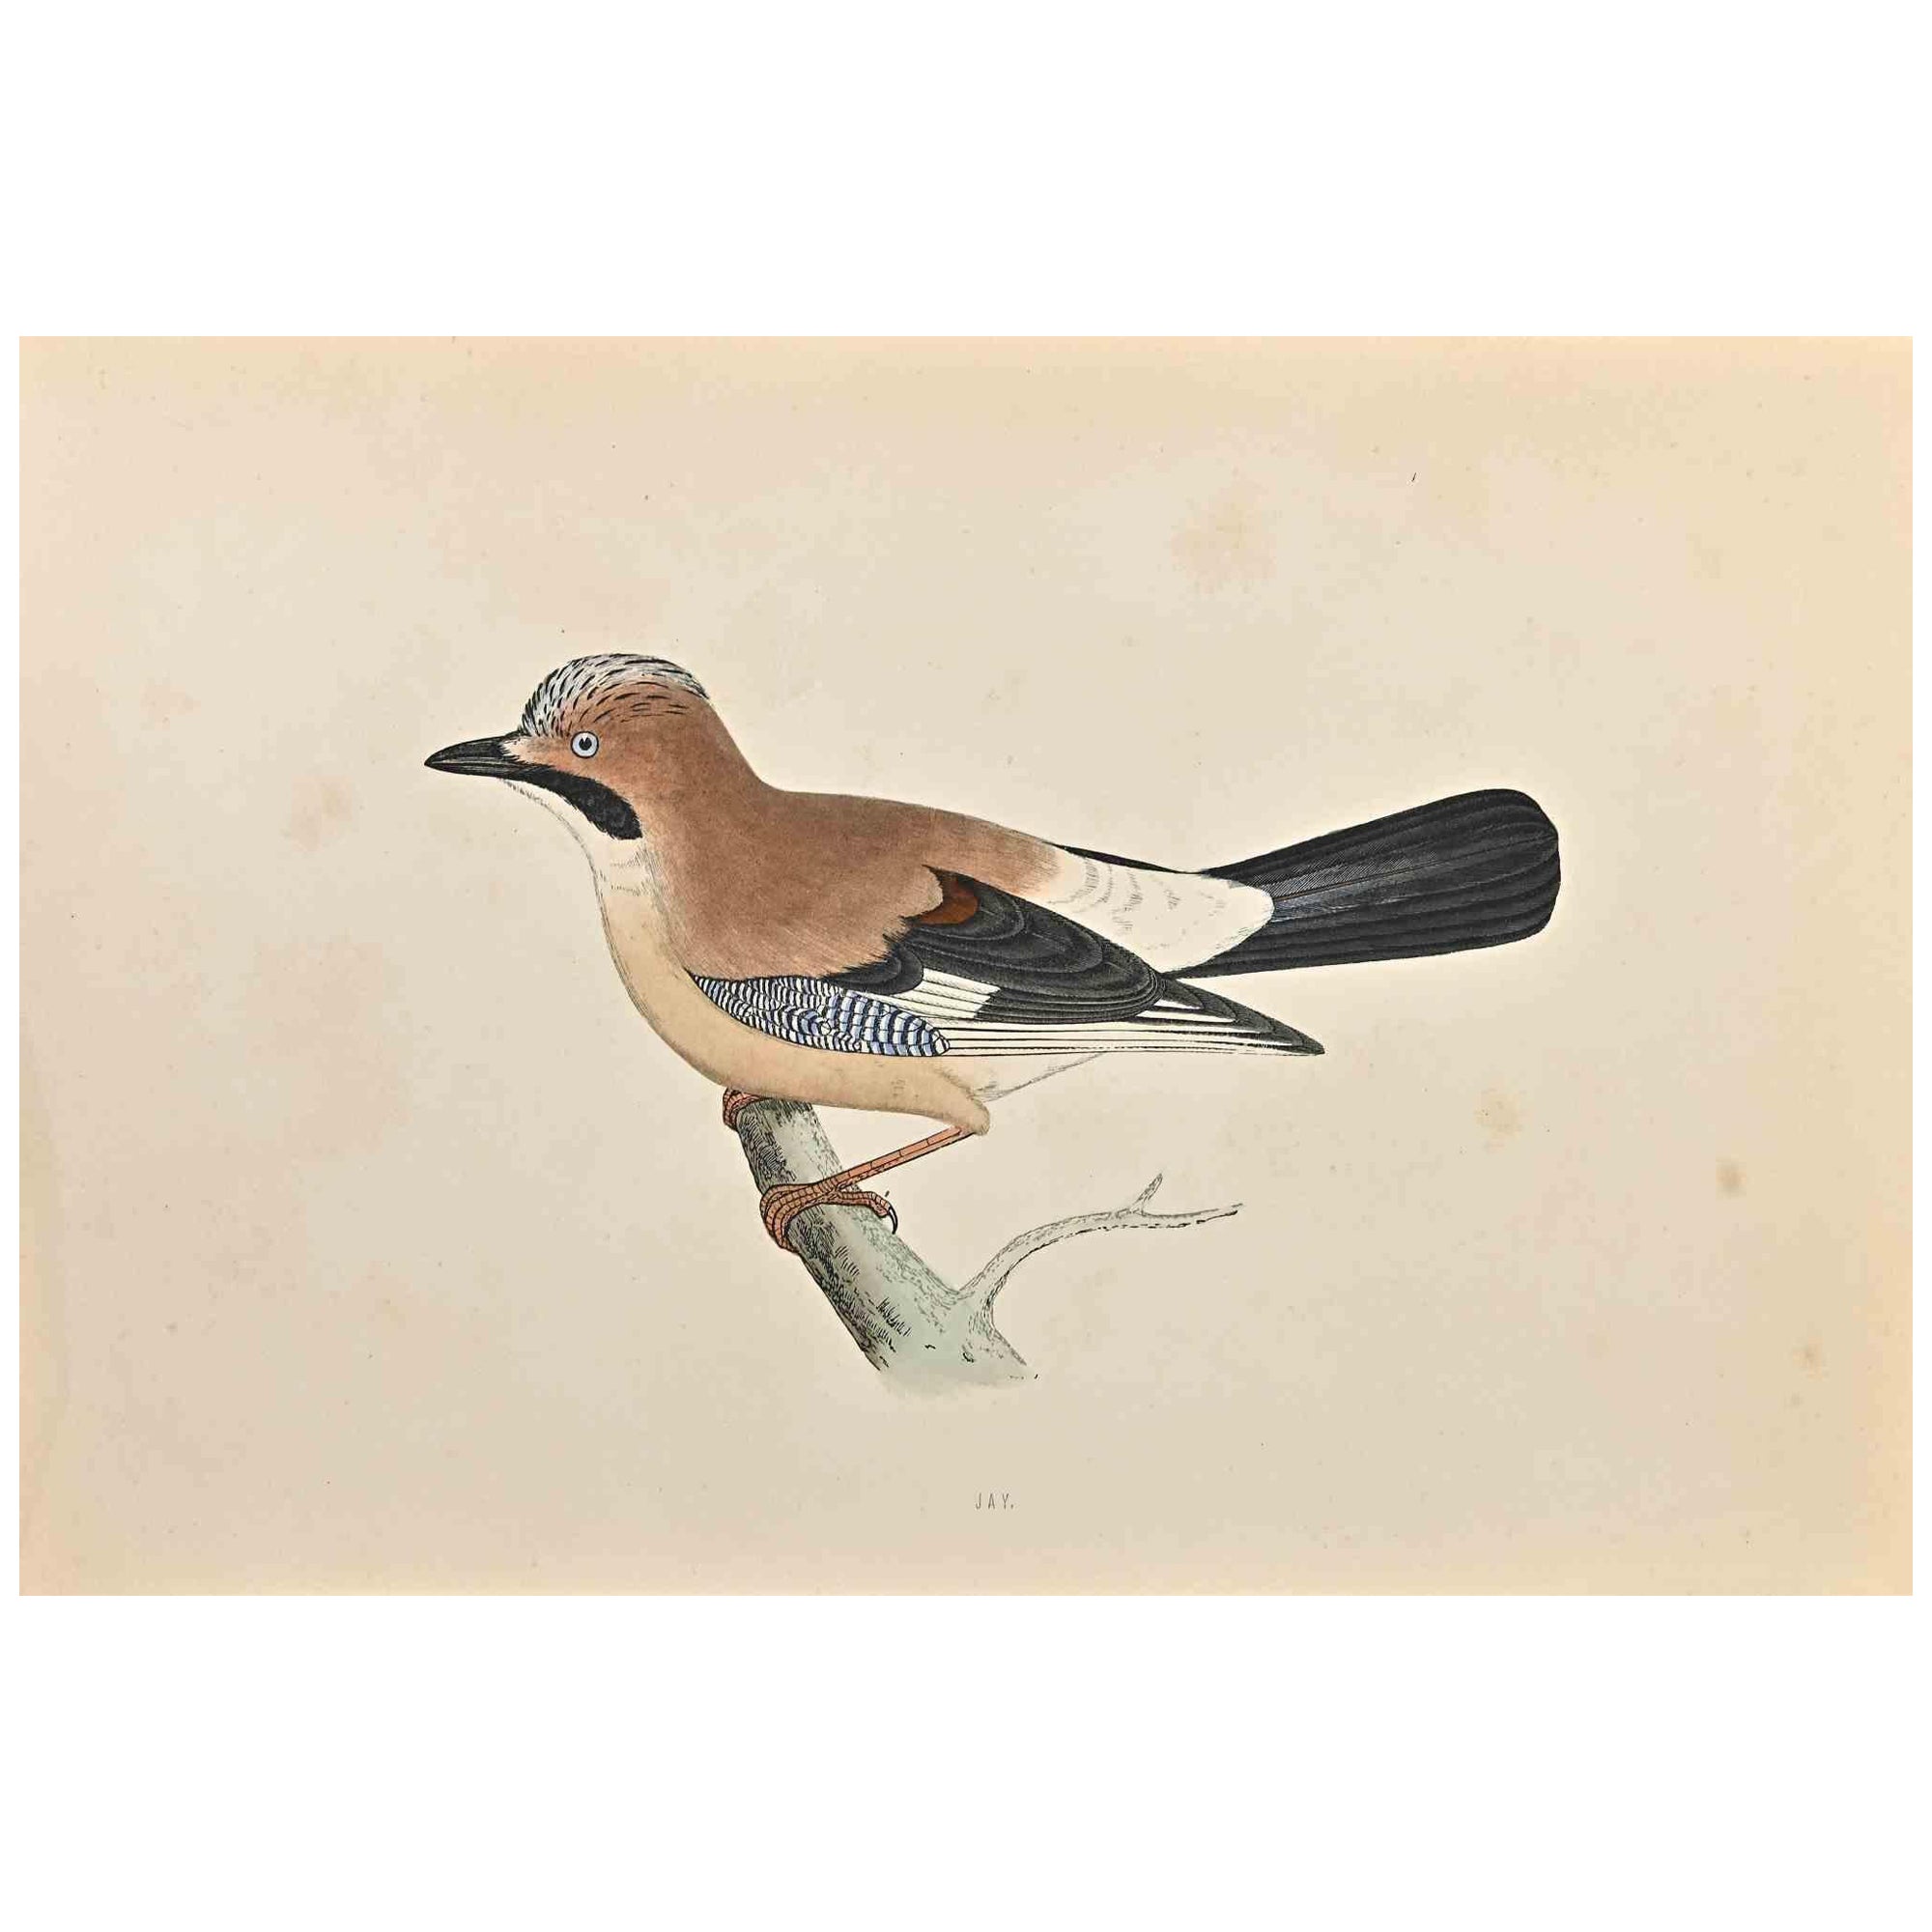 Jay is a modern artwork realized in 1870 by the British artist Alexander Francis Lydon (1836-1917).

Woodcut print on ivory-colored paper.

Hand-colored, published by London, Bell & Sons, 1870.  

The name of the bird is printed on the plate. This